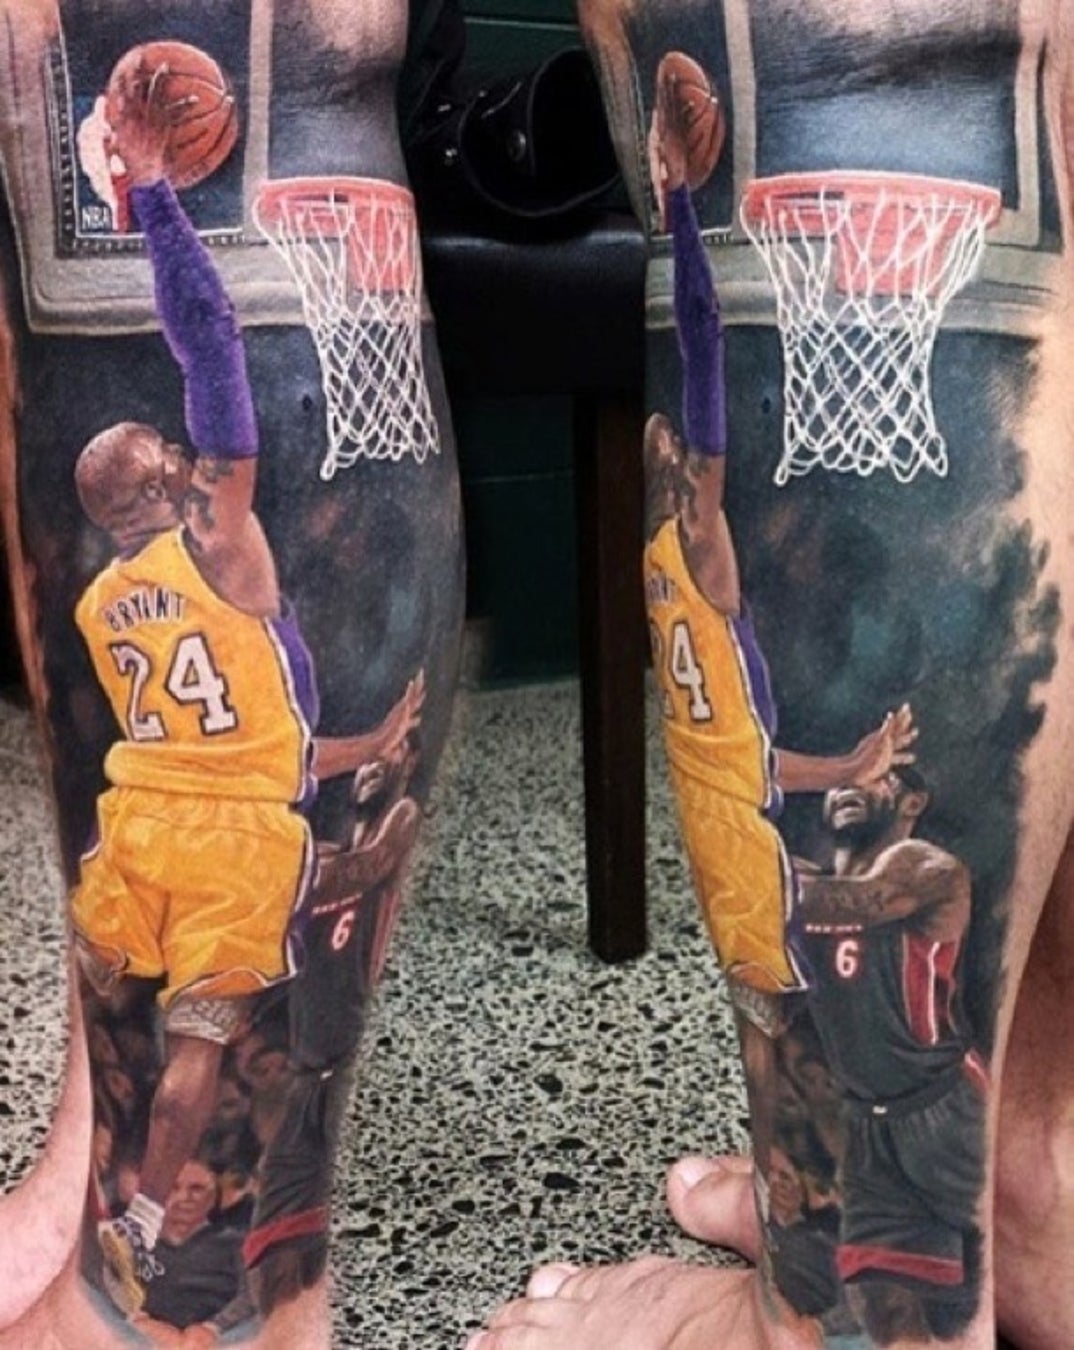 Steve Butcher's Ink-redible Sports Tattoos